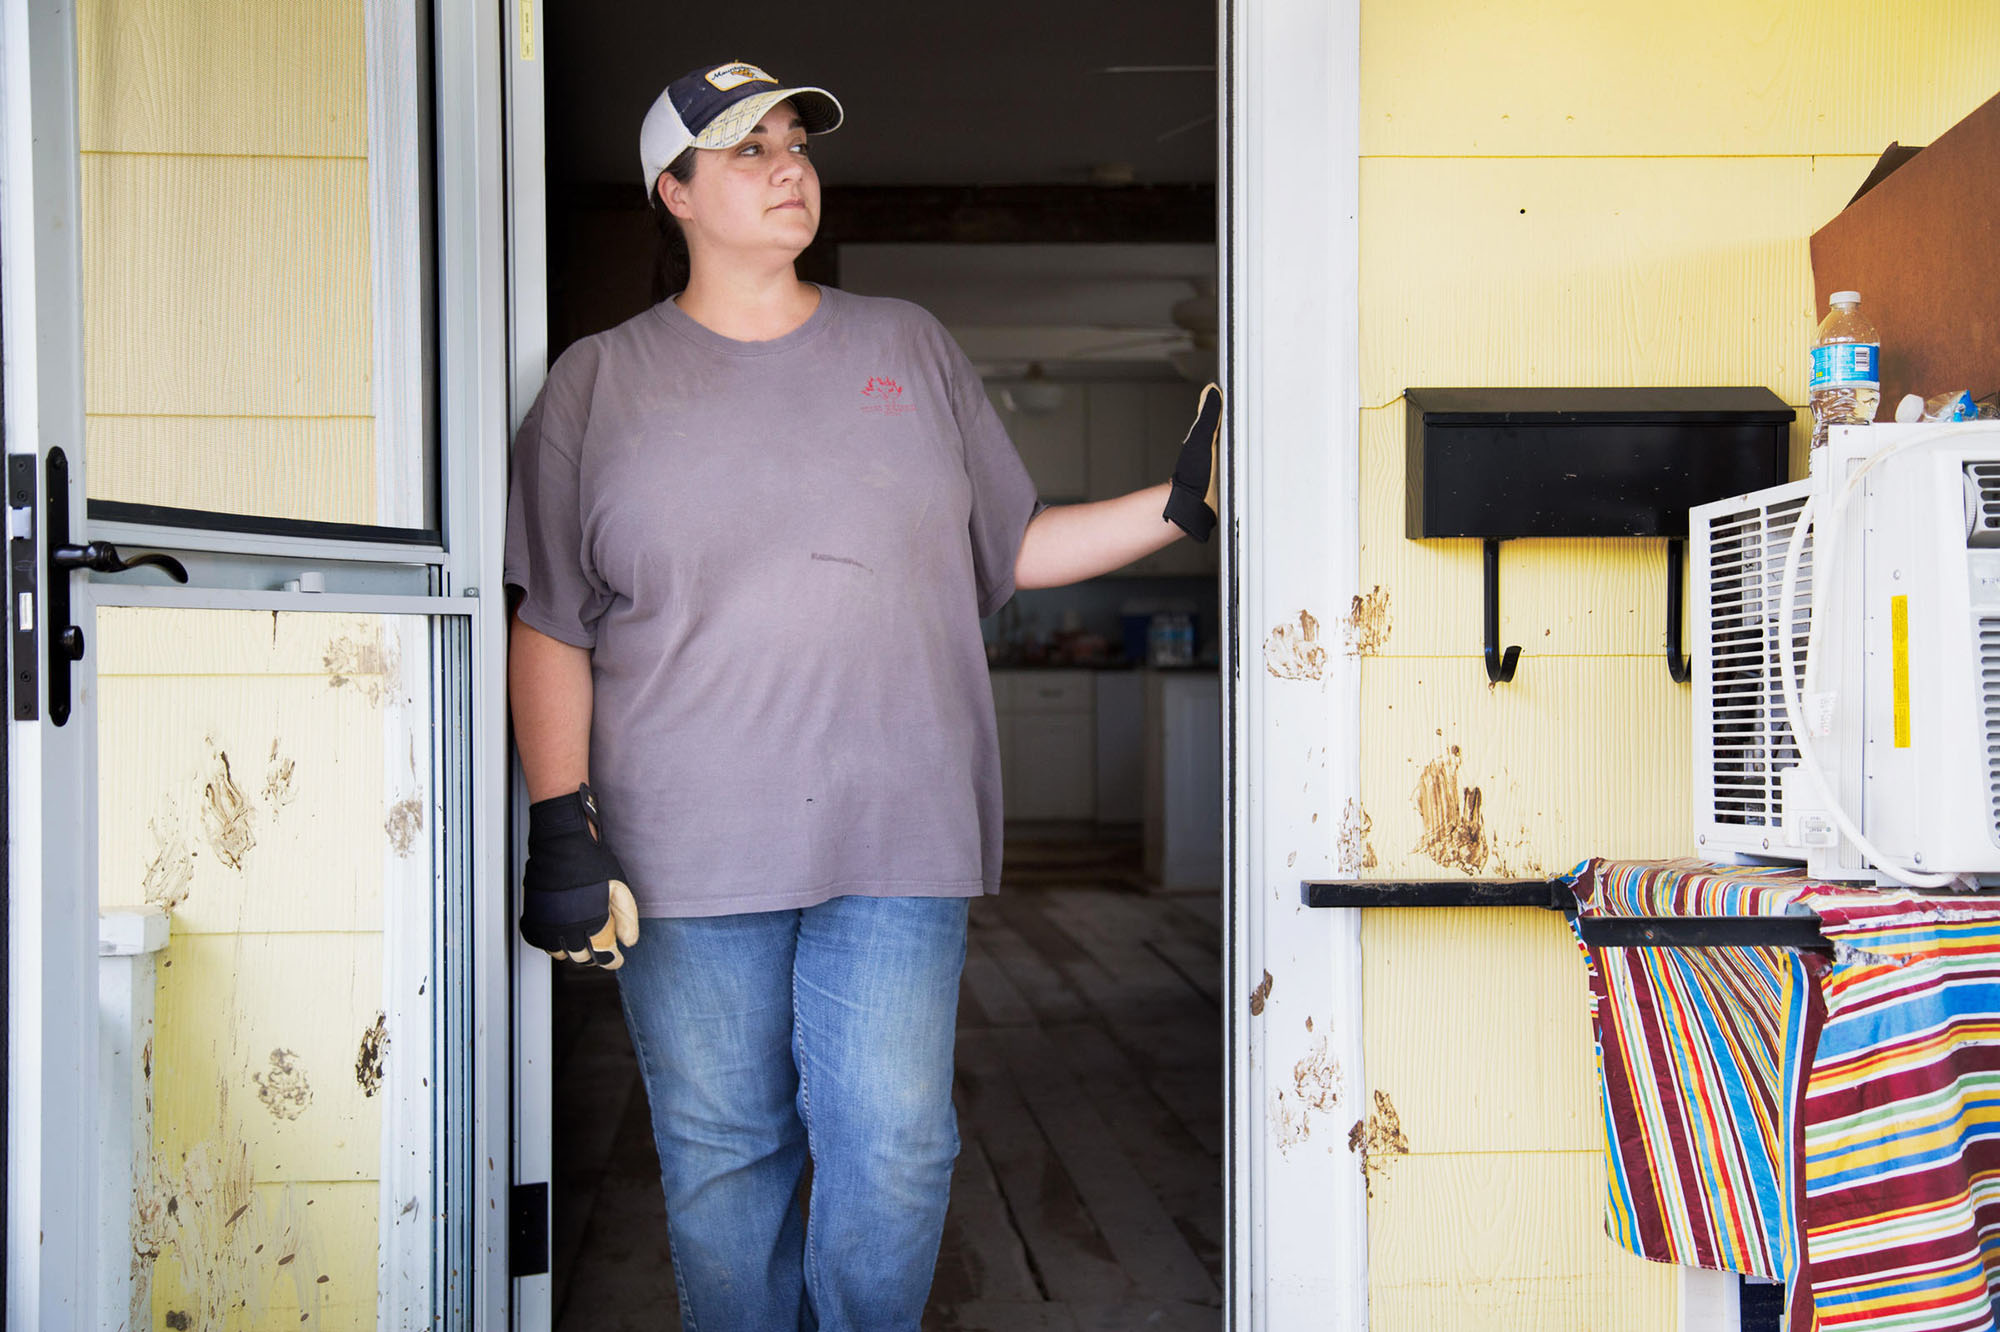 Rachel Taylor surveys the flood damage from her front porch in White Sulphur Springs, W.Va. Muddy paw prints on the front door still mark her dog's panic as the waters rose. He survived, but others didn't.